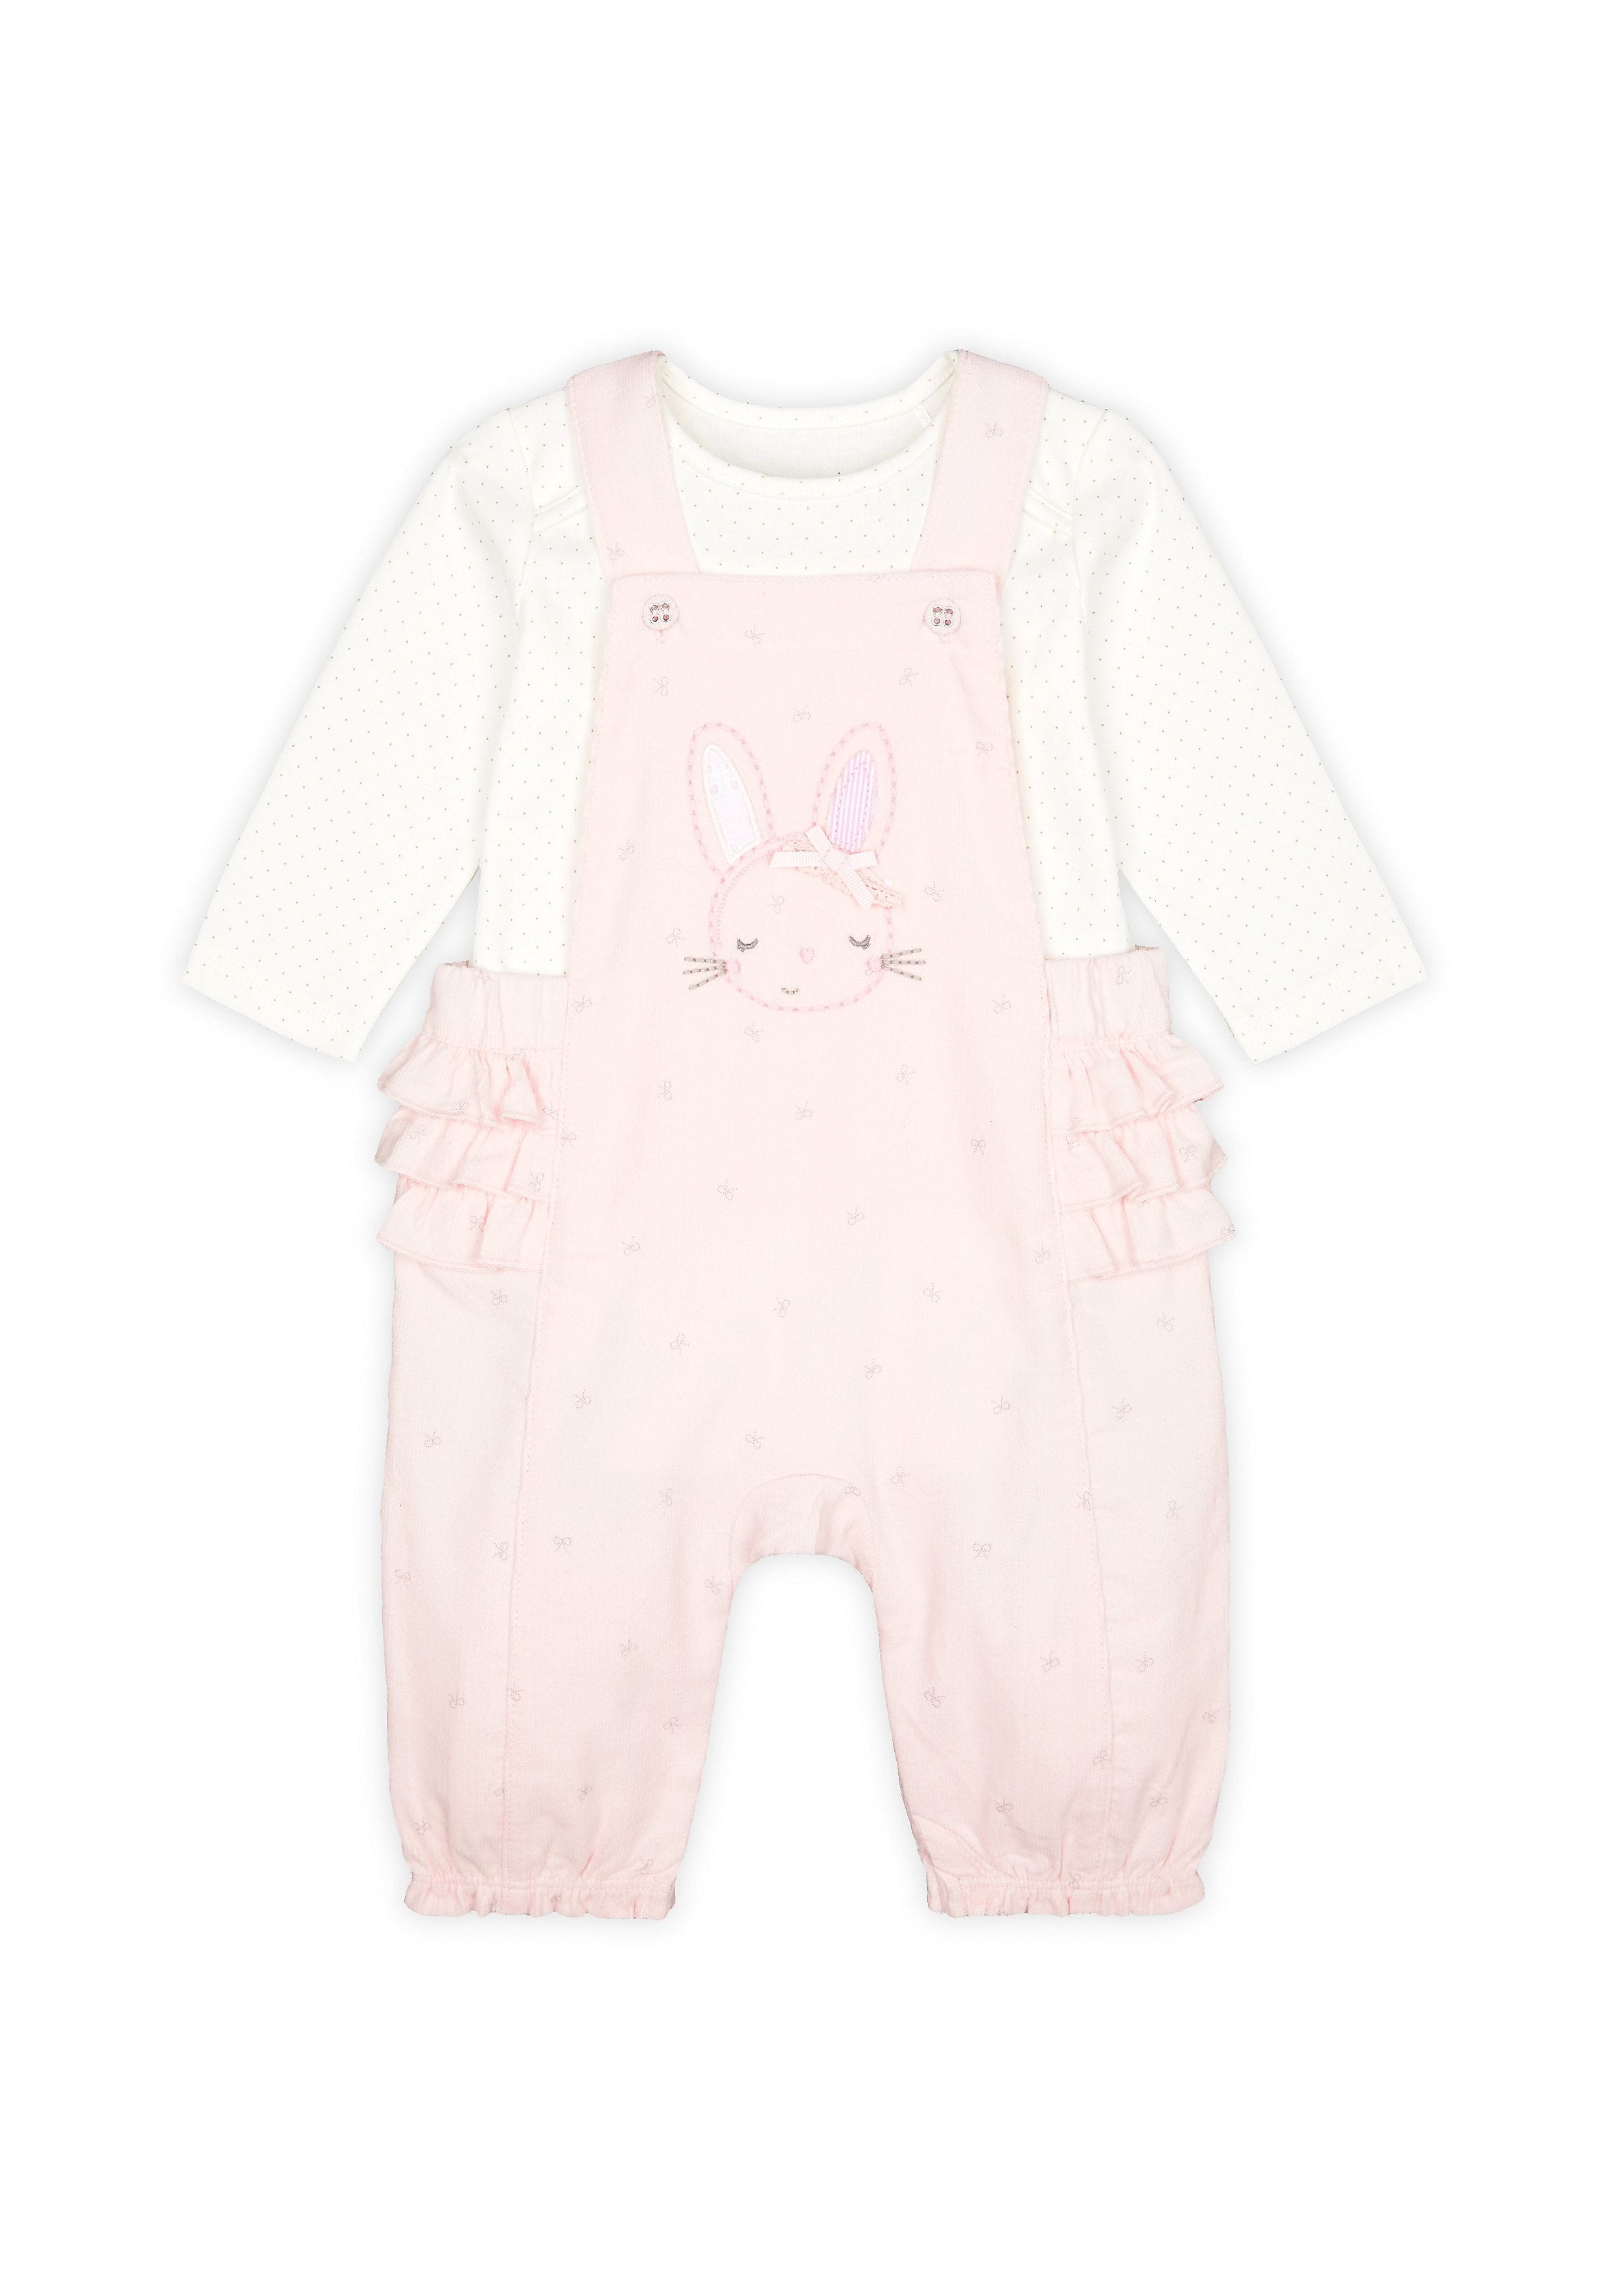 Mothercare | Girls Full Sleeves Cord Dungaree Set Bunny Embroidery With Frill Details - Pink 0